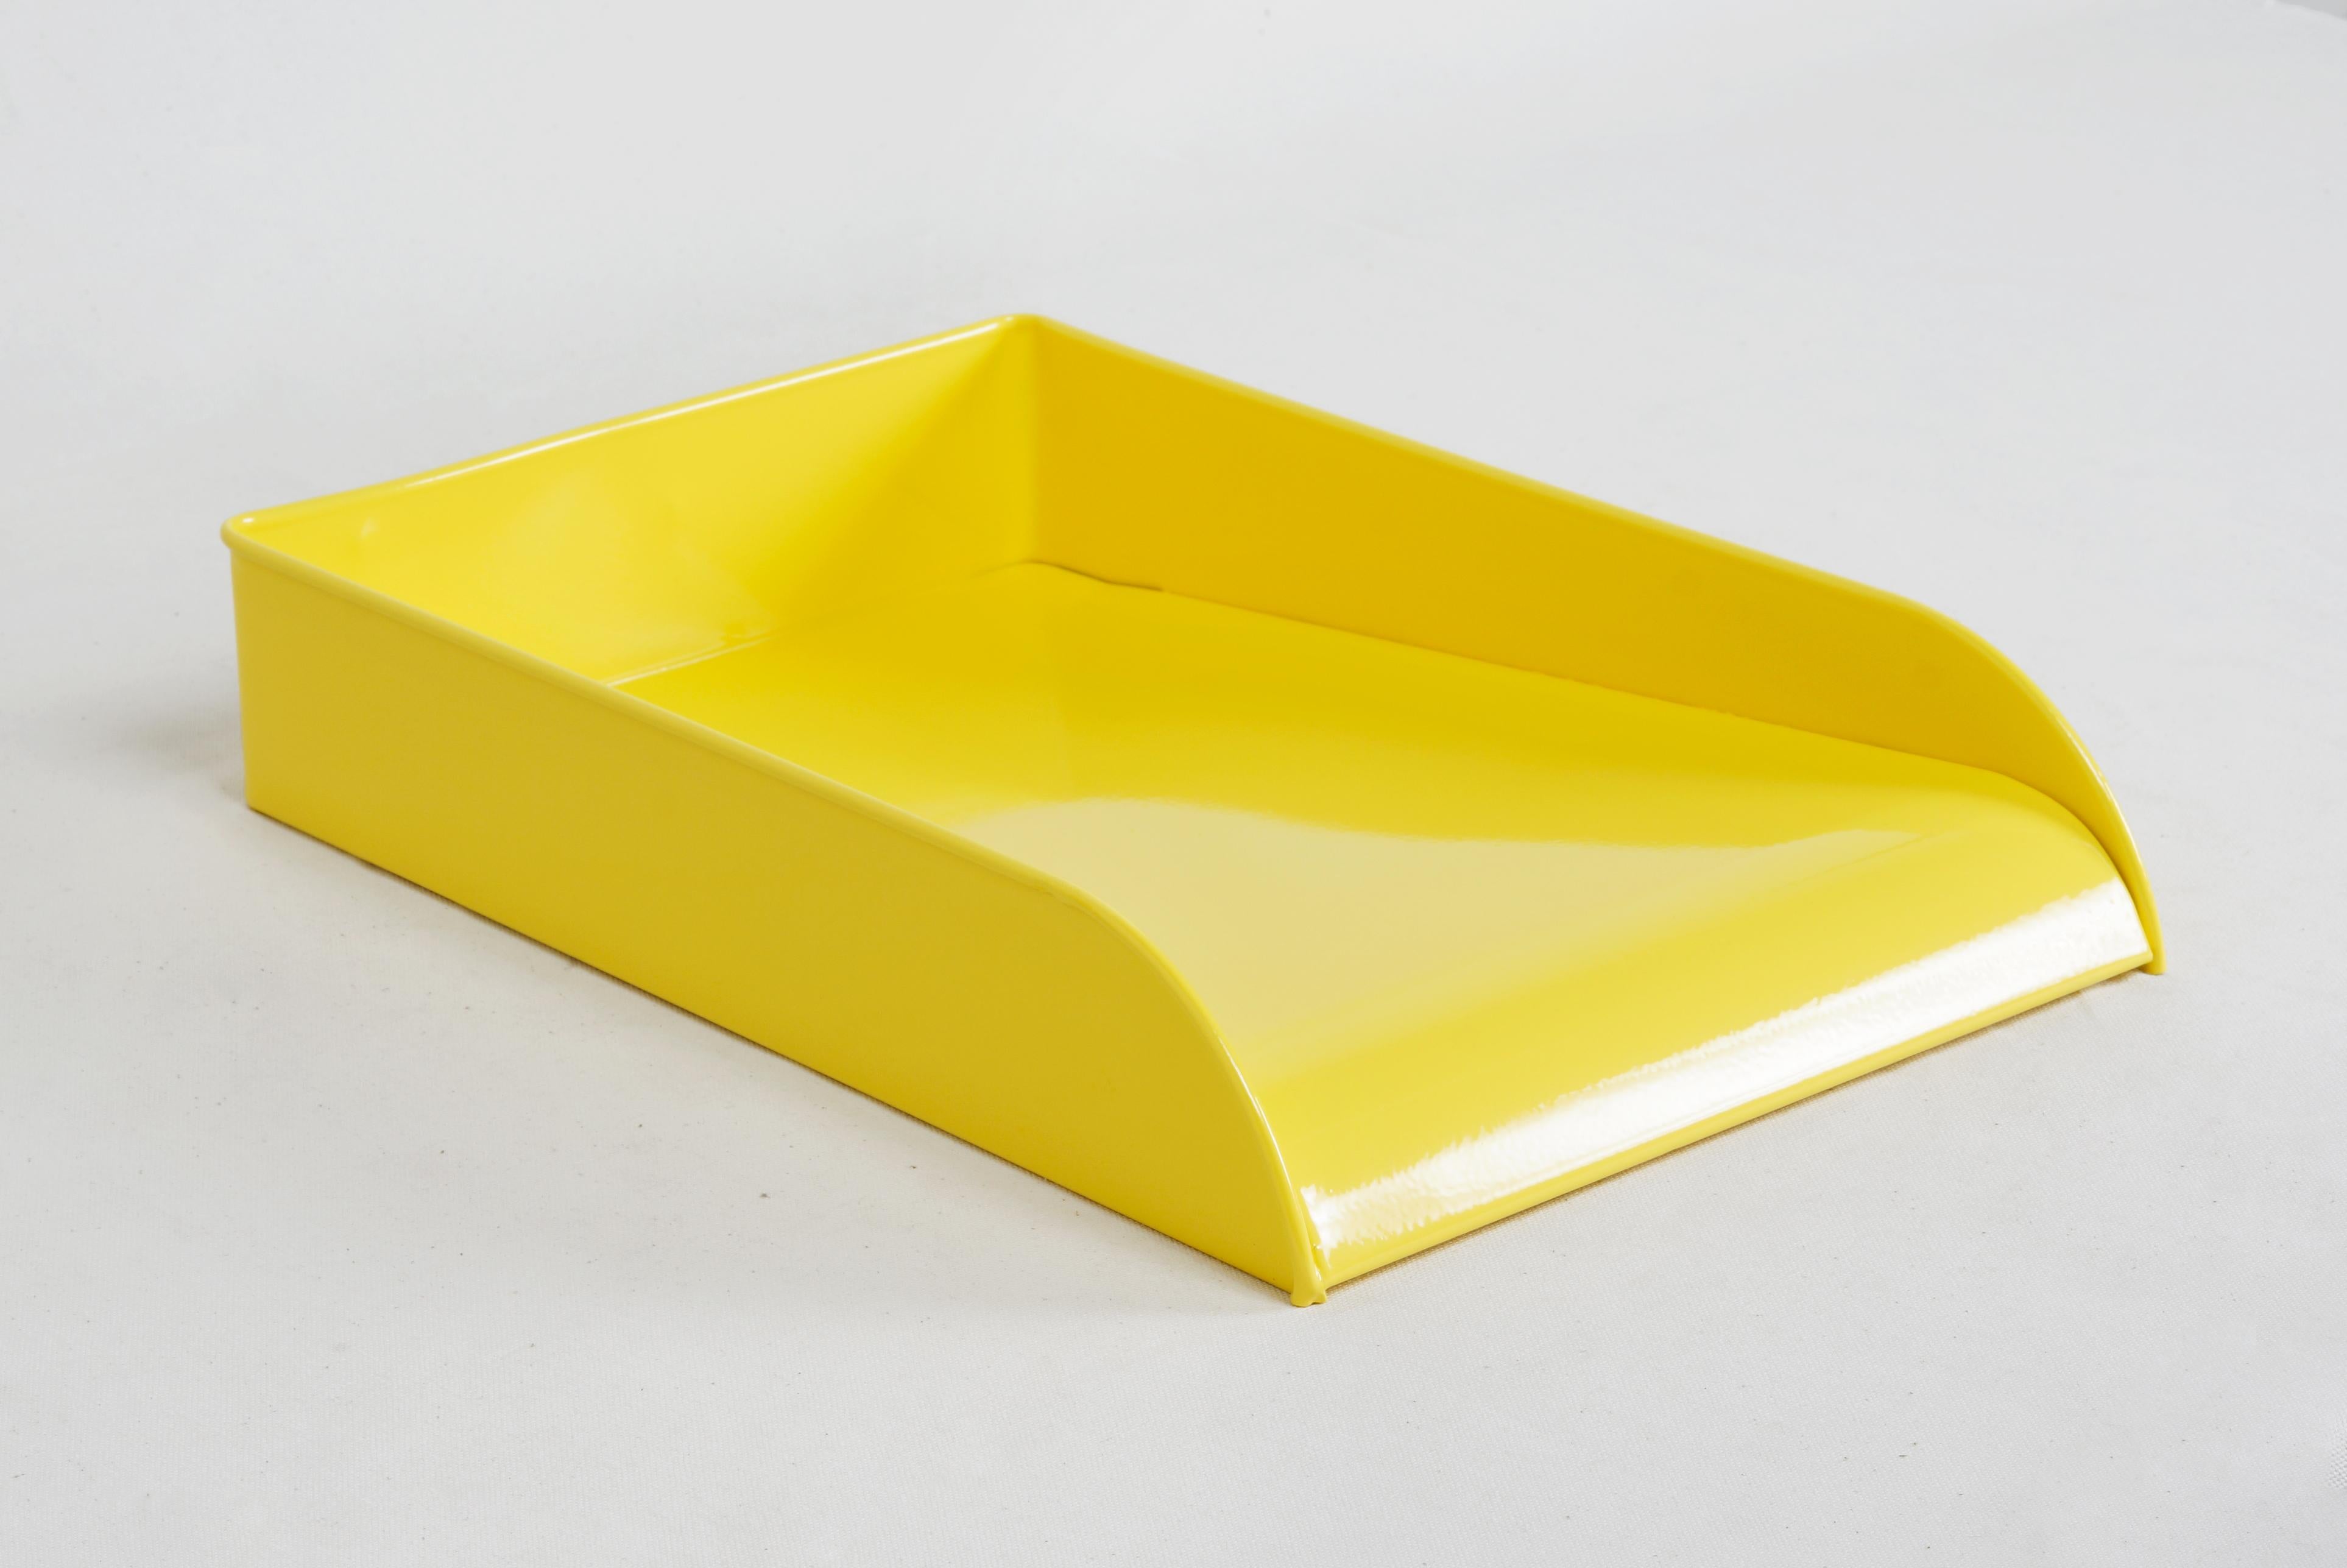 Vintage Art Deco office letter, memo or mail tray powder-coated in gloss Sunshine Yellow. This uniquely finished organizational piece is sure to keep your retro office in tip-top shape. Excellent refinished vintage condition. 
 
Dimensions: 15